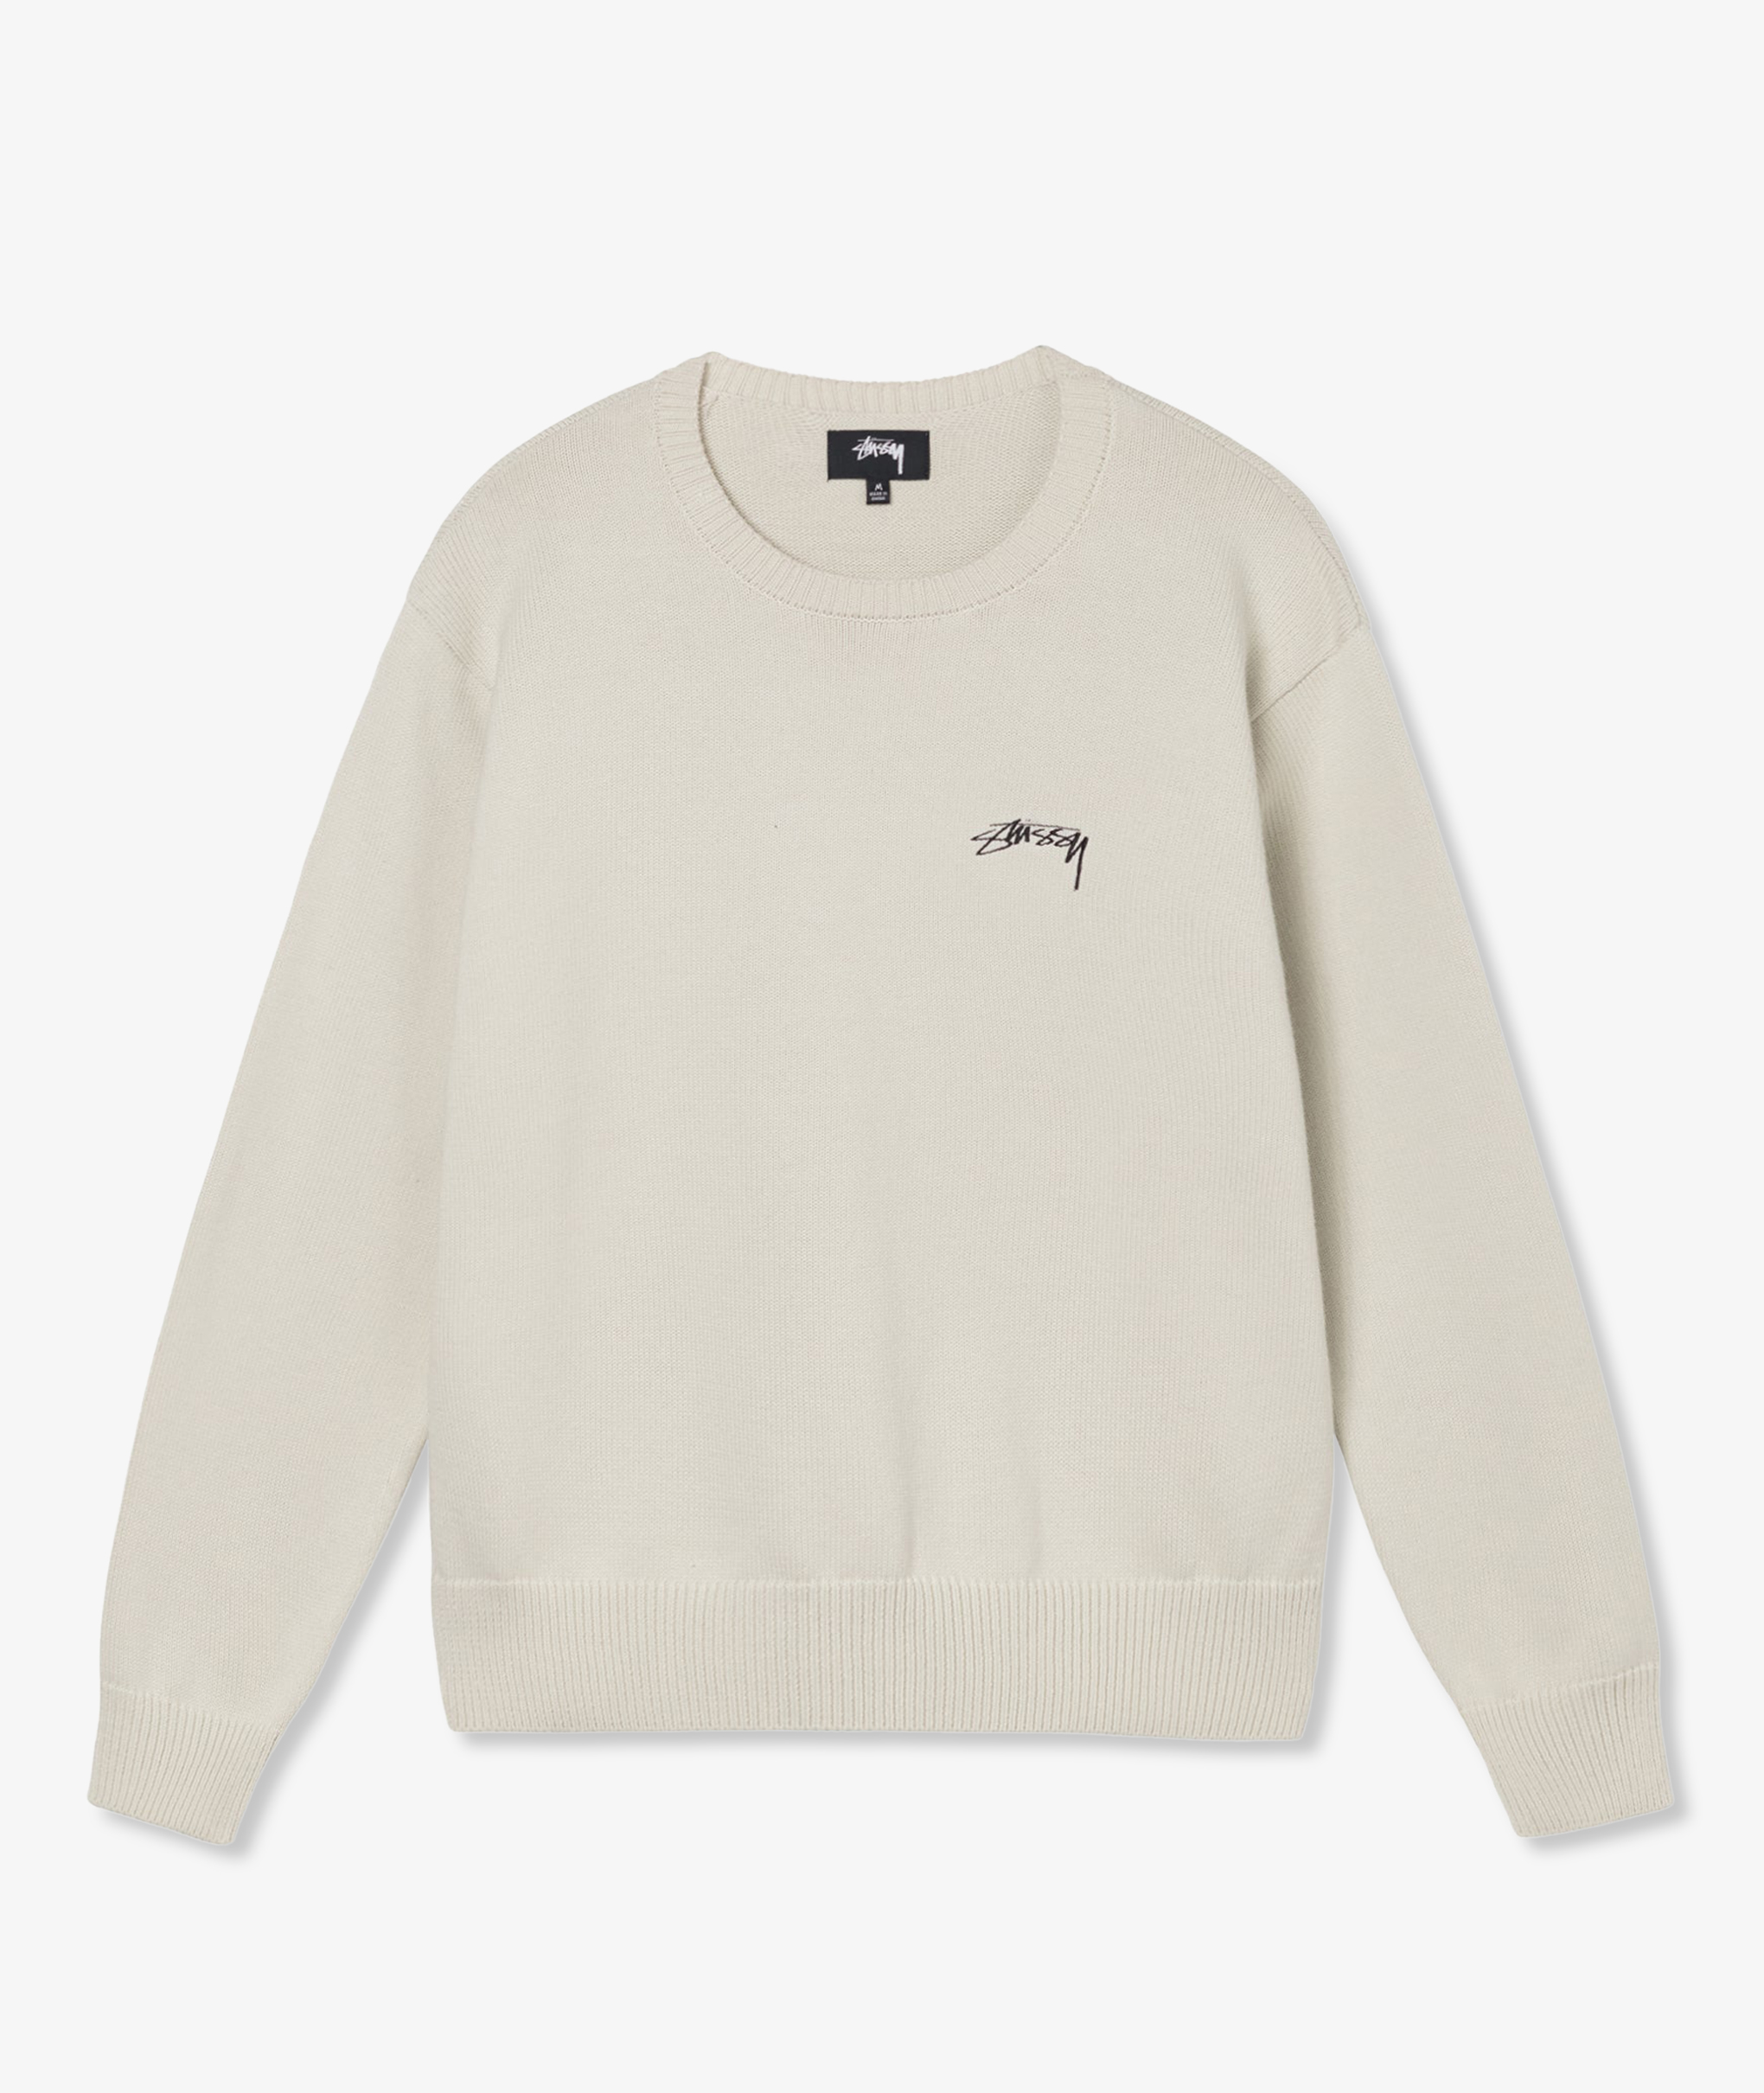 Norse Store | Shipping Worldwide - Stussy Care Label Sweater - Natural